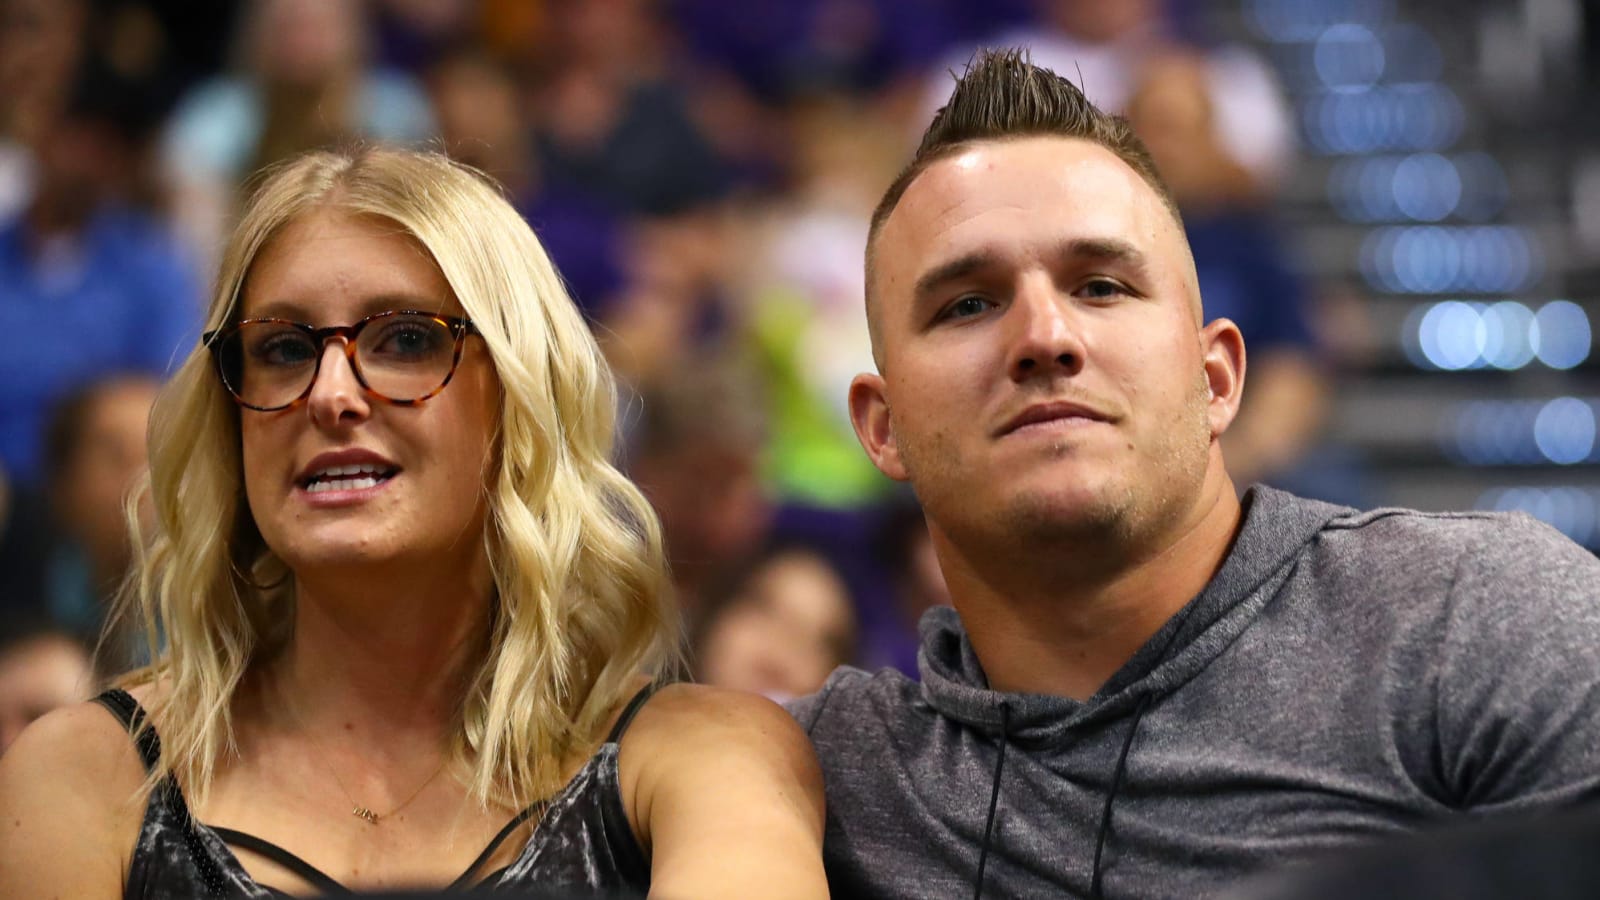 Mike Trout, whose wife is pregnant, unsure if he'll play this season